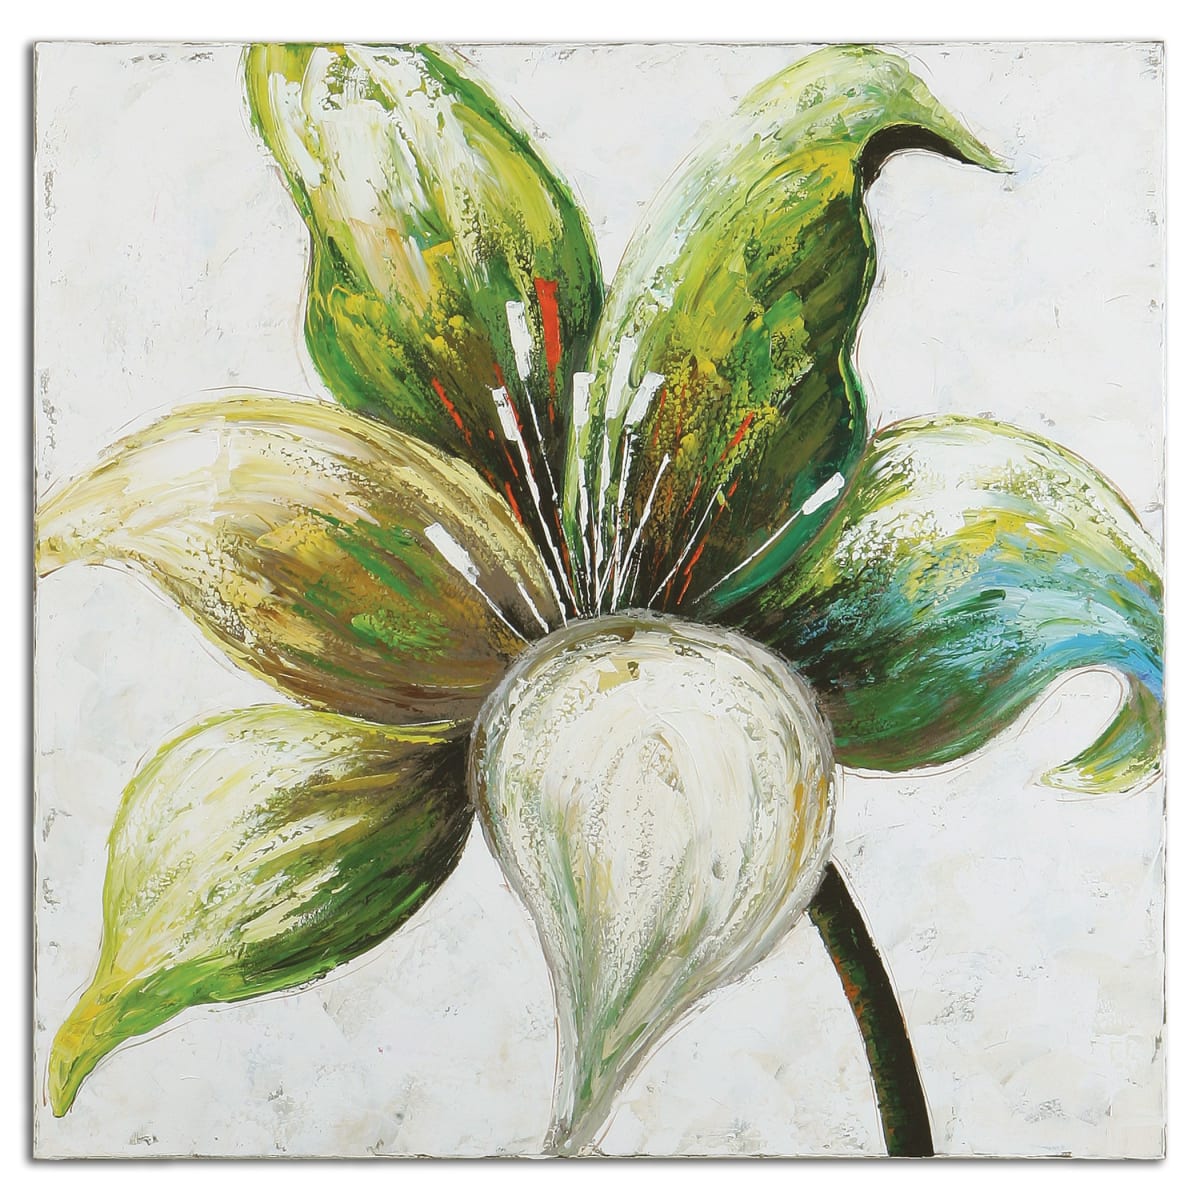 Uttermost 41909 Lovely Lady Floral Impressionist Wall Art | Build.com